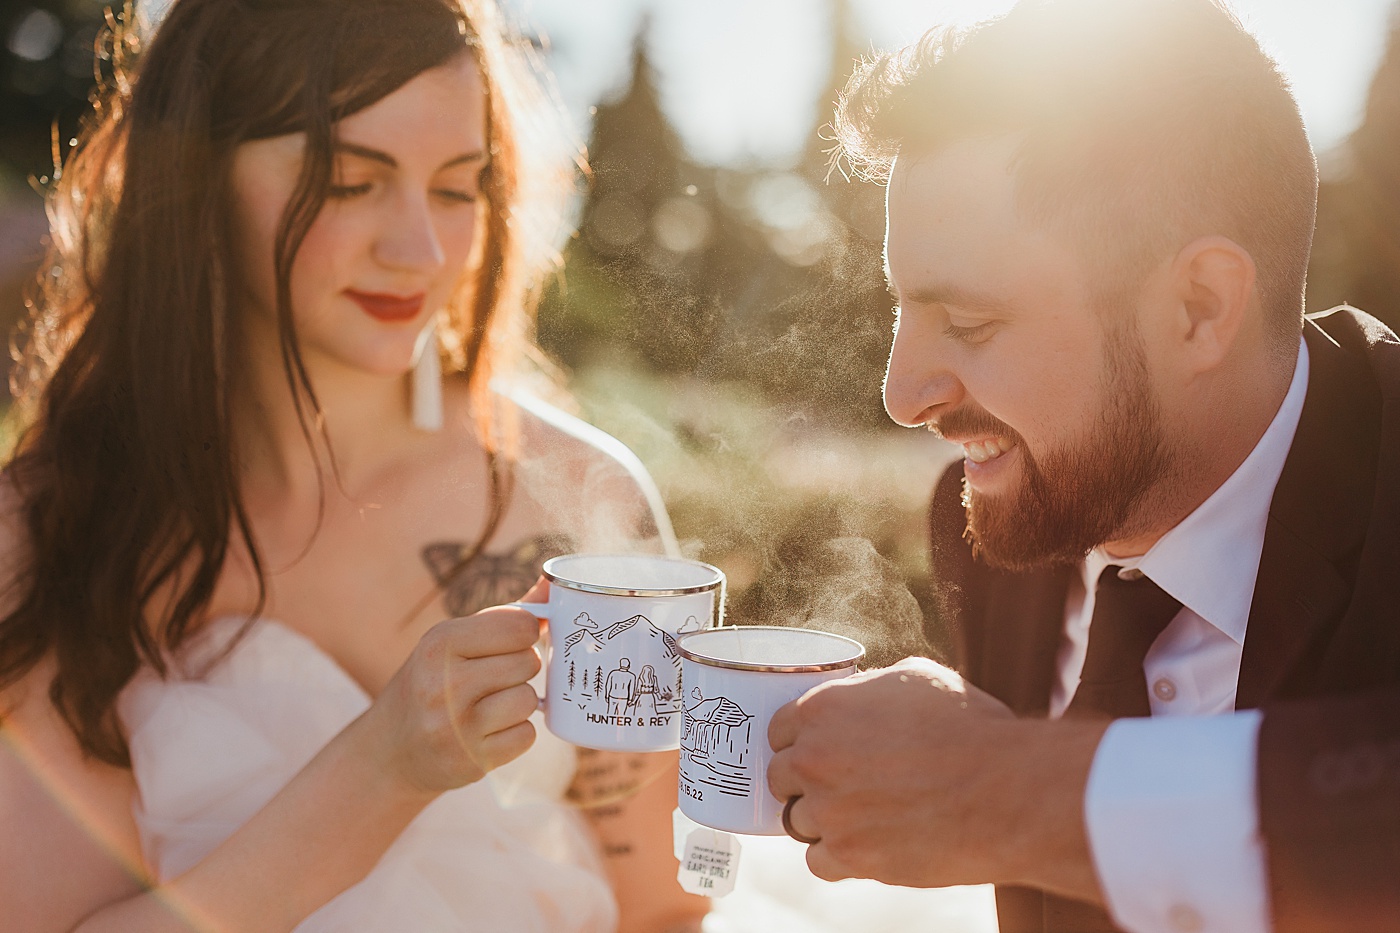 Bride and groom share tea together at Mount Rainier | Photo by Megan Montalvo Photography